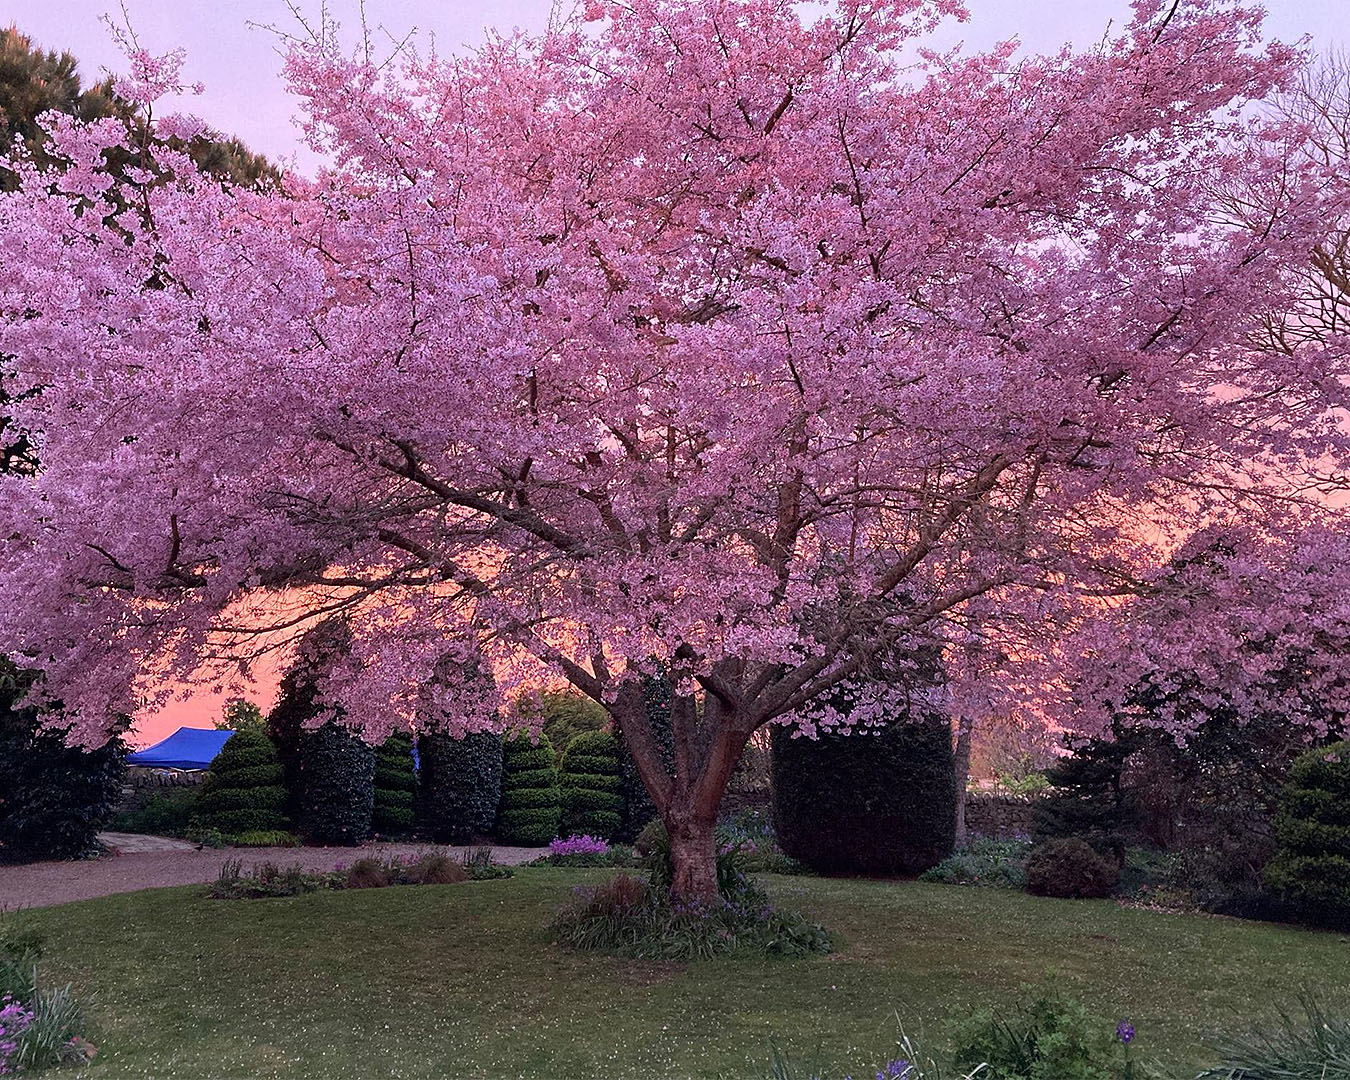 A tree in full blossom at the NZ Cherry Blossom Festival.